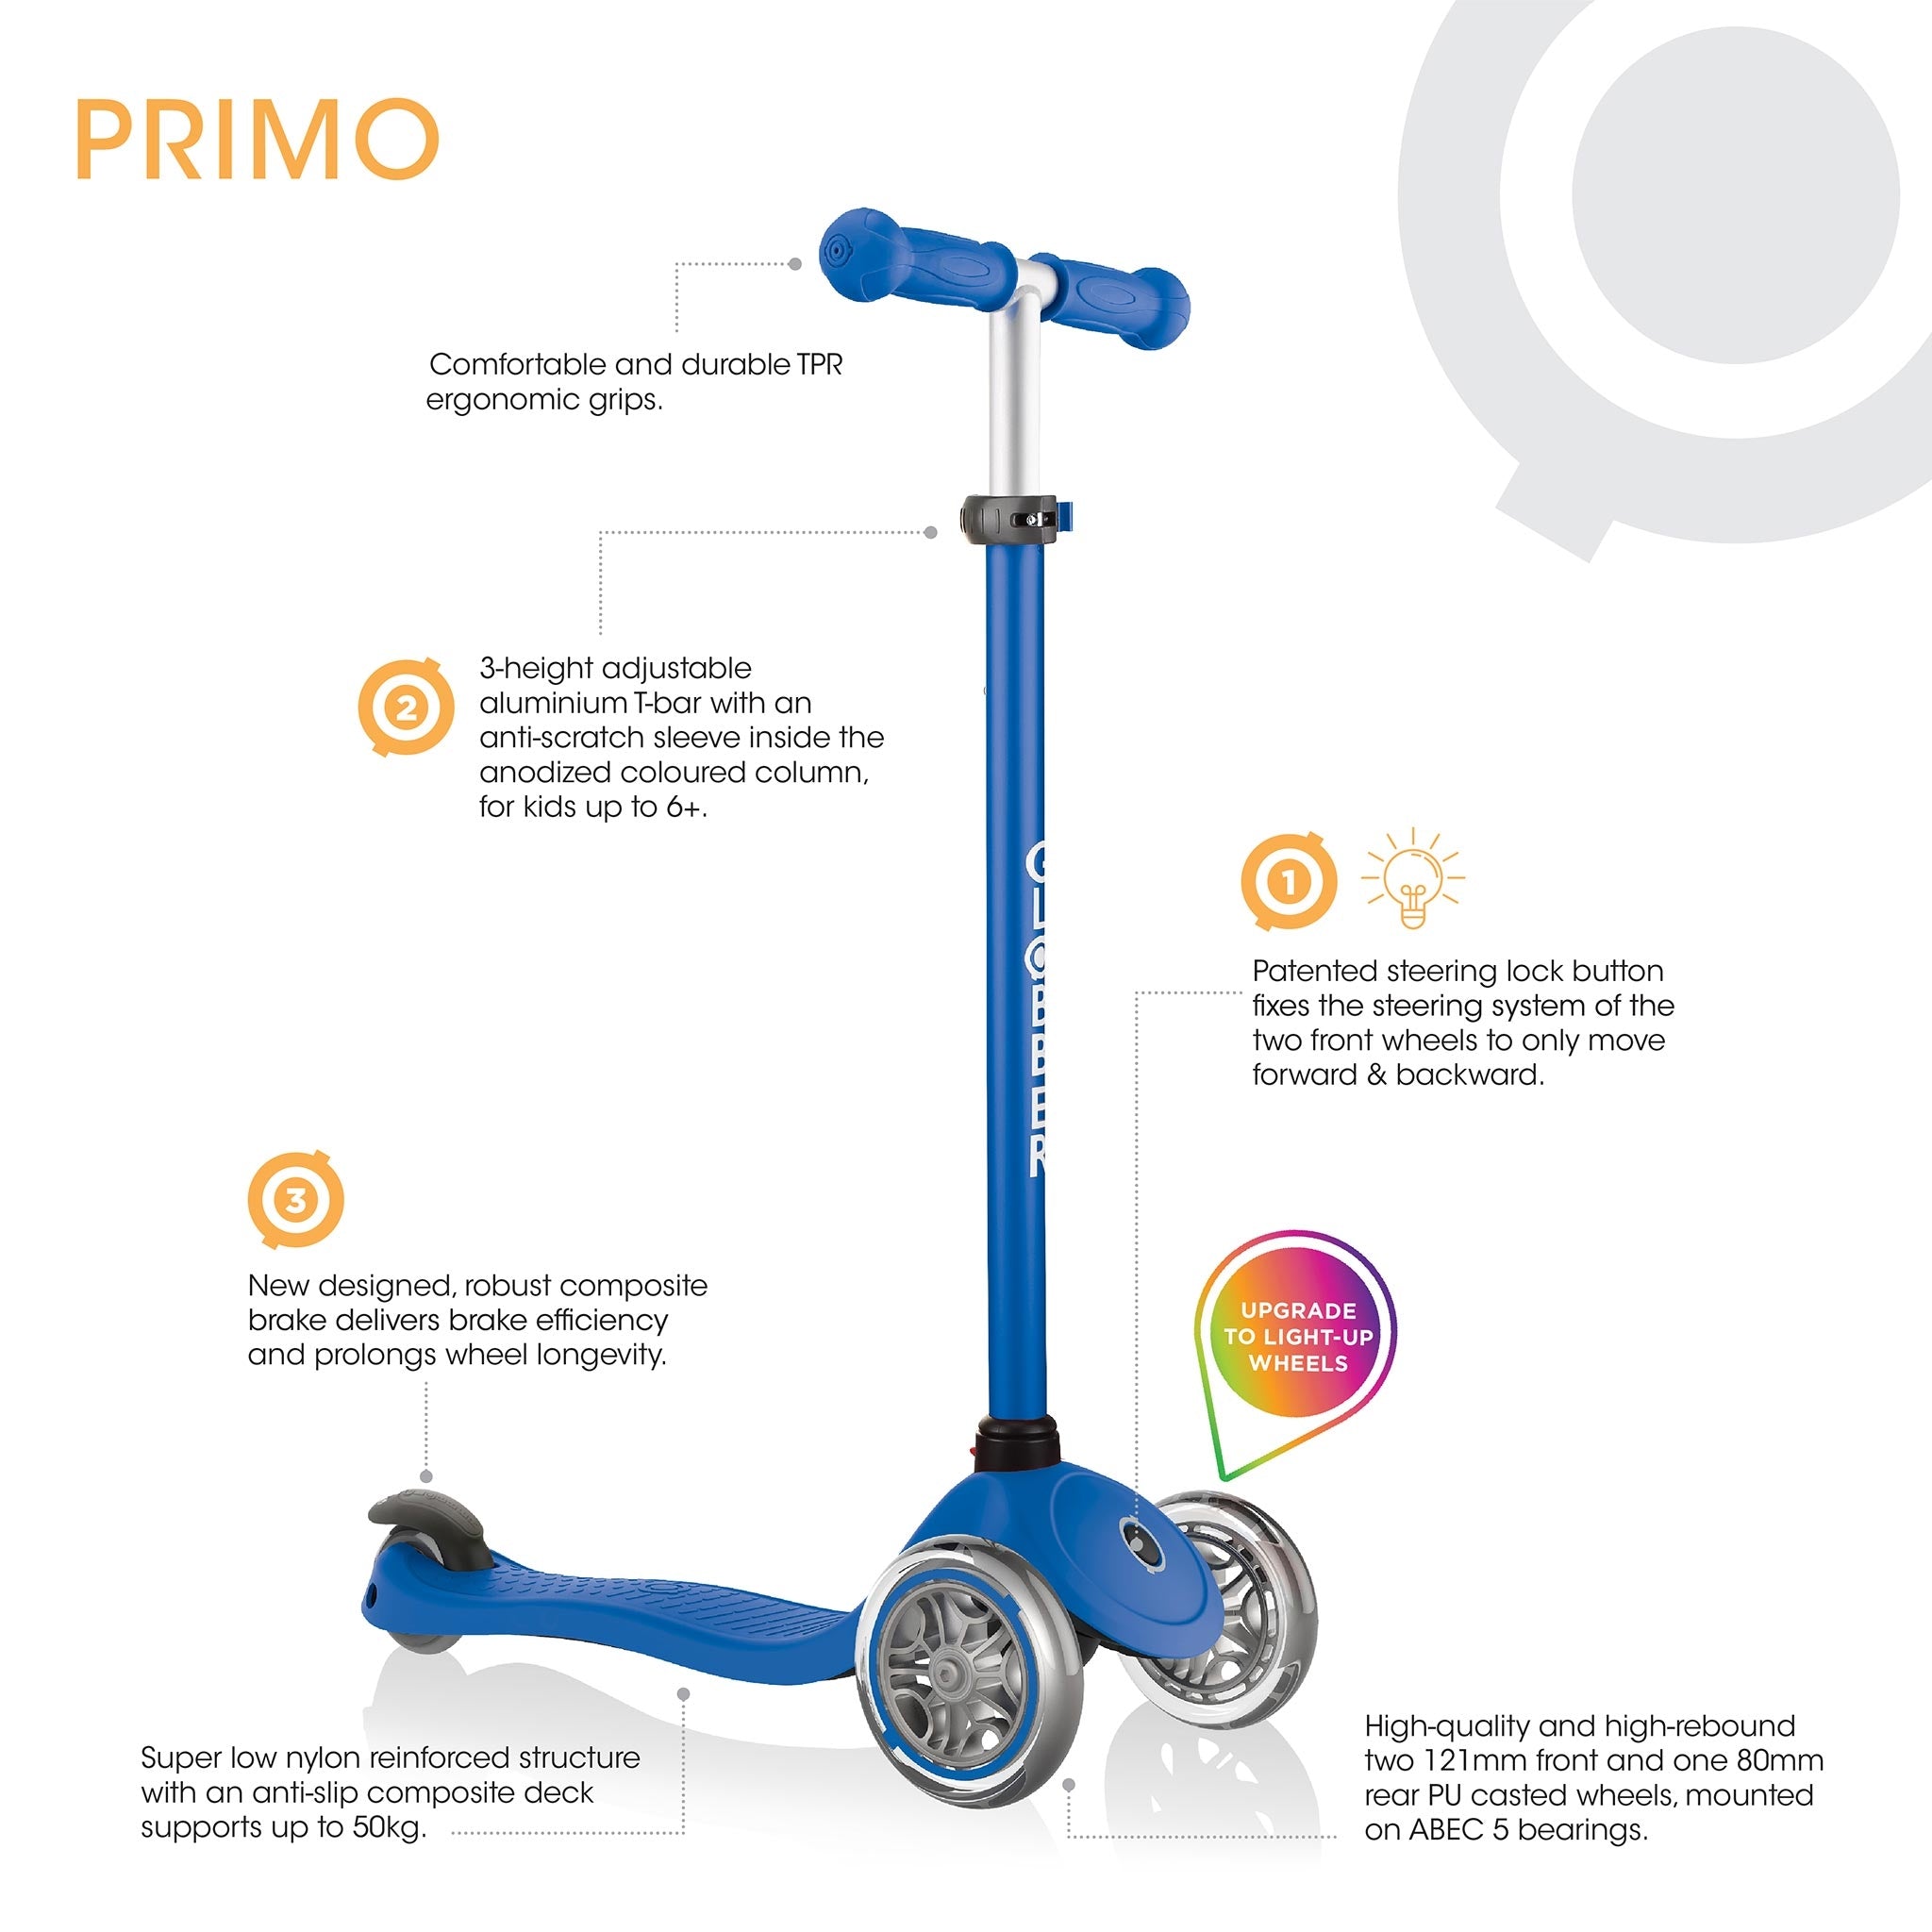 See all the features of the Globber Primo Light kids scooter at a glance